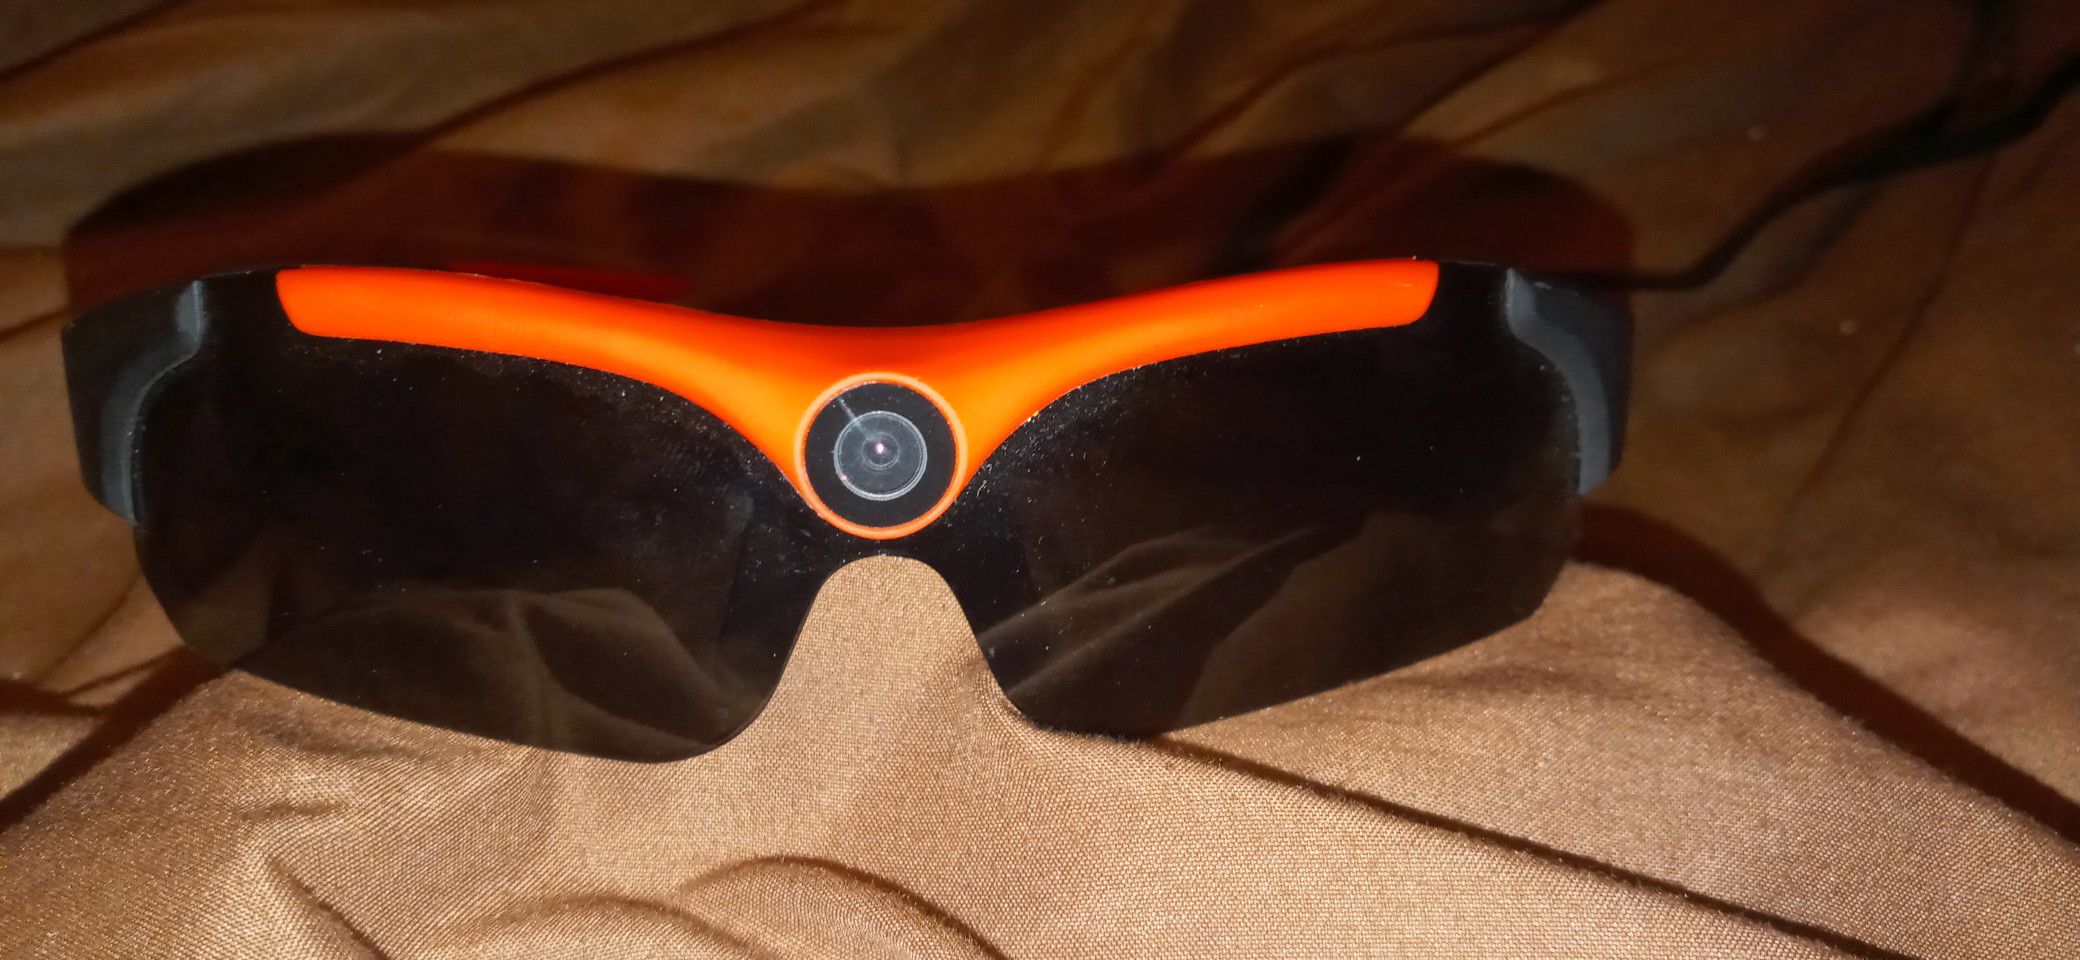 Magnavox sunglasses with built in camera.